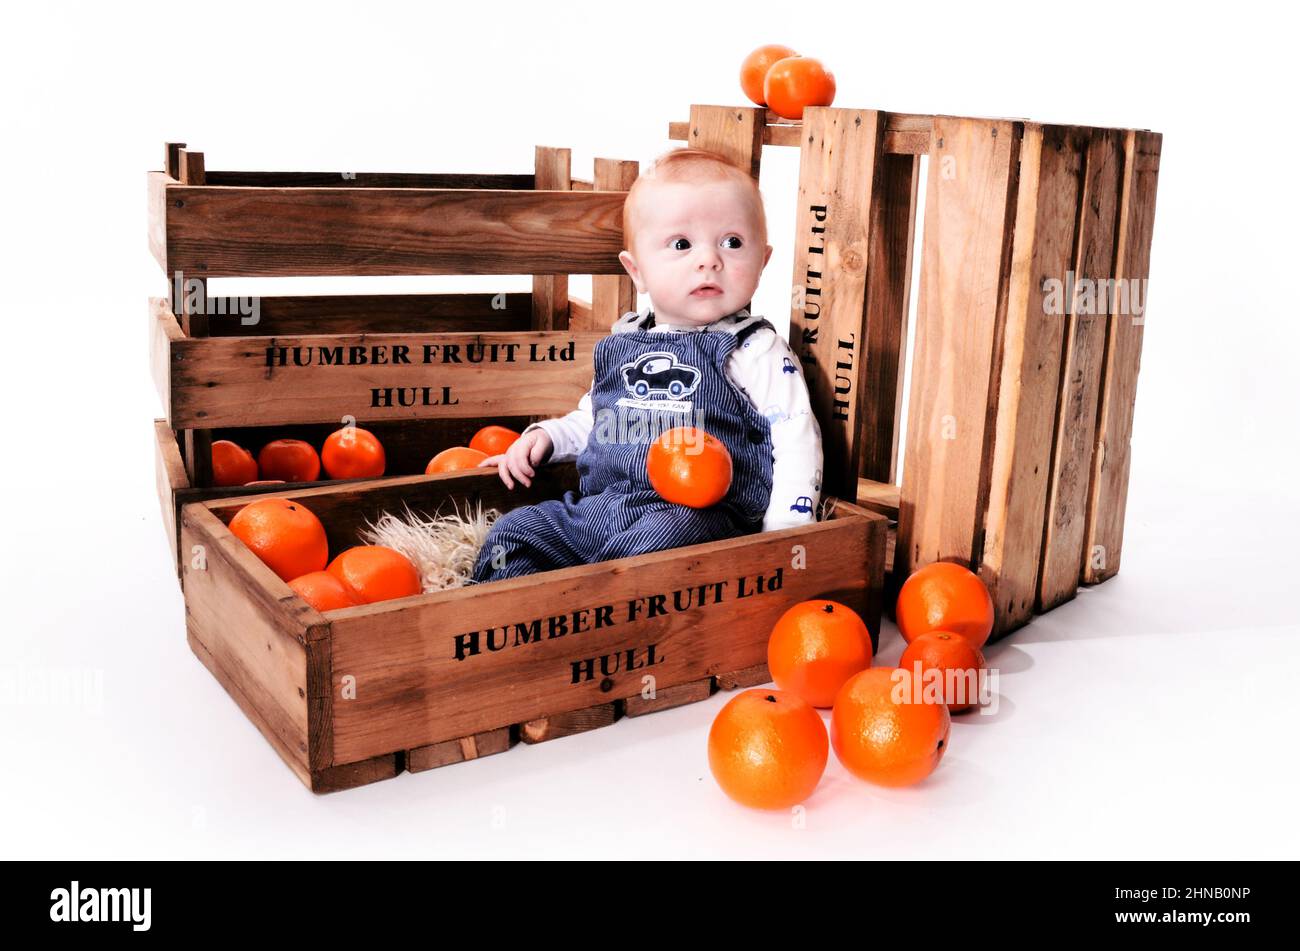 Happy infant boy with red hair playing in an orange fruit box Stock Photo